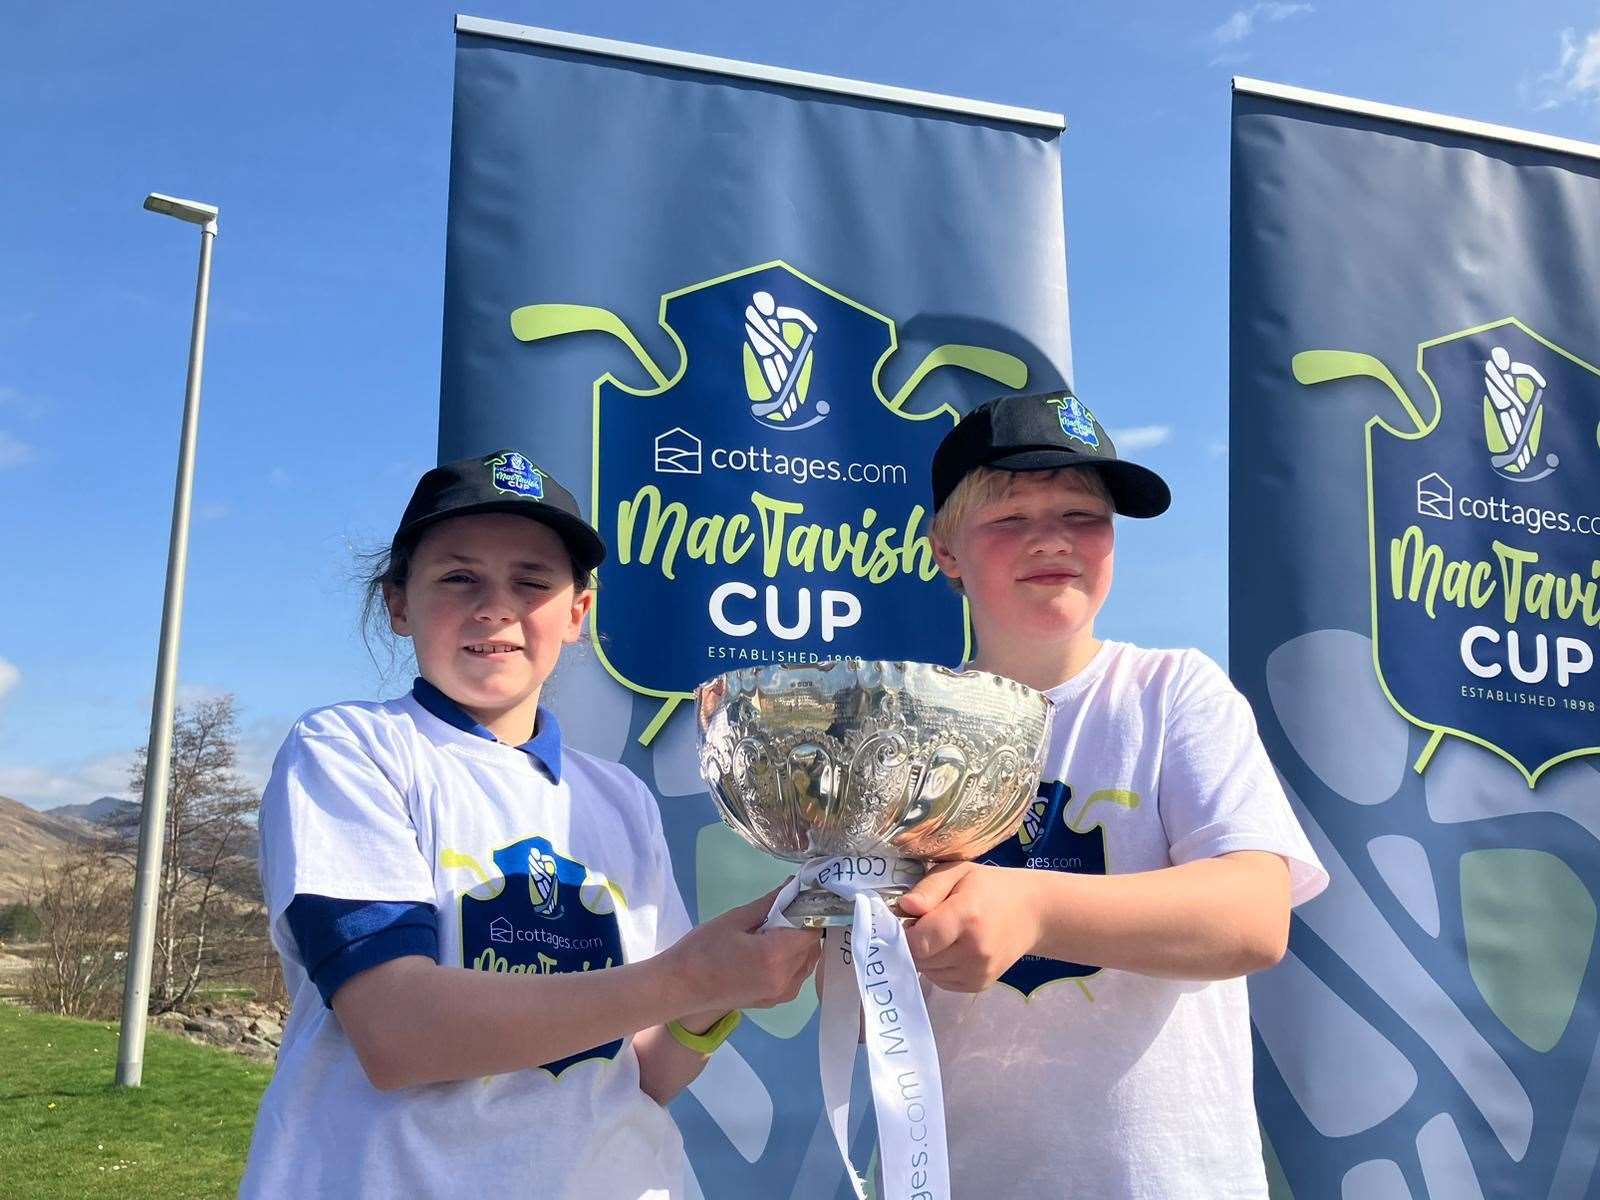 Maura and Kenny from Lochcarron Primary School with the famous cottages.com MacTavish Cup.